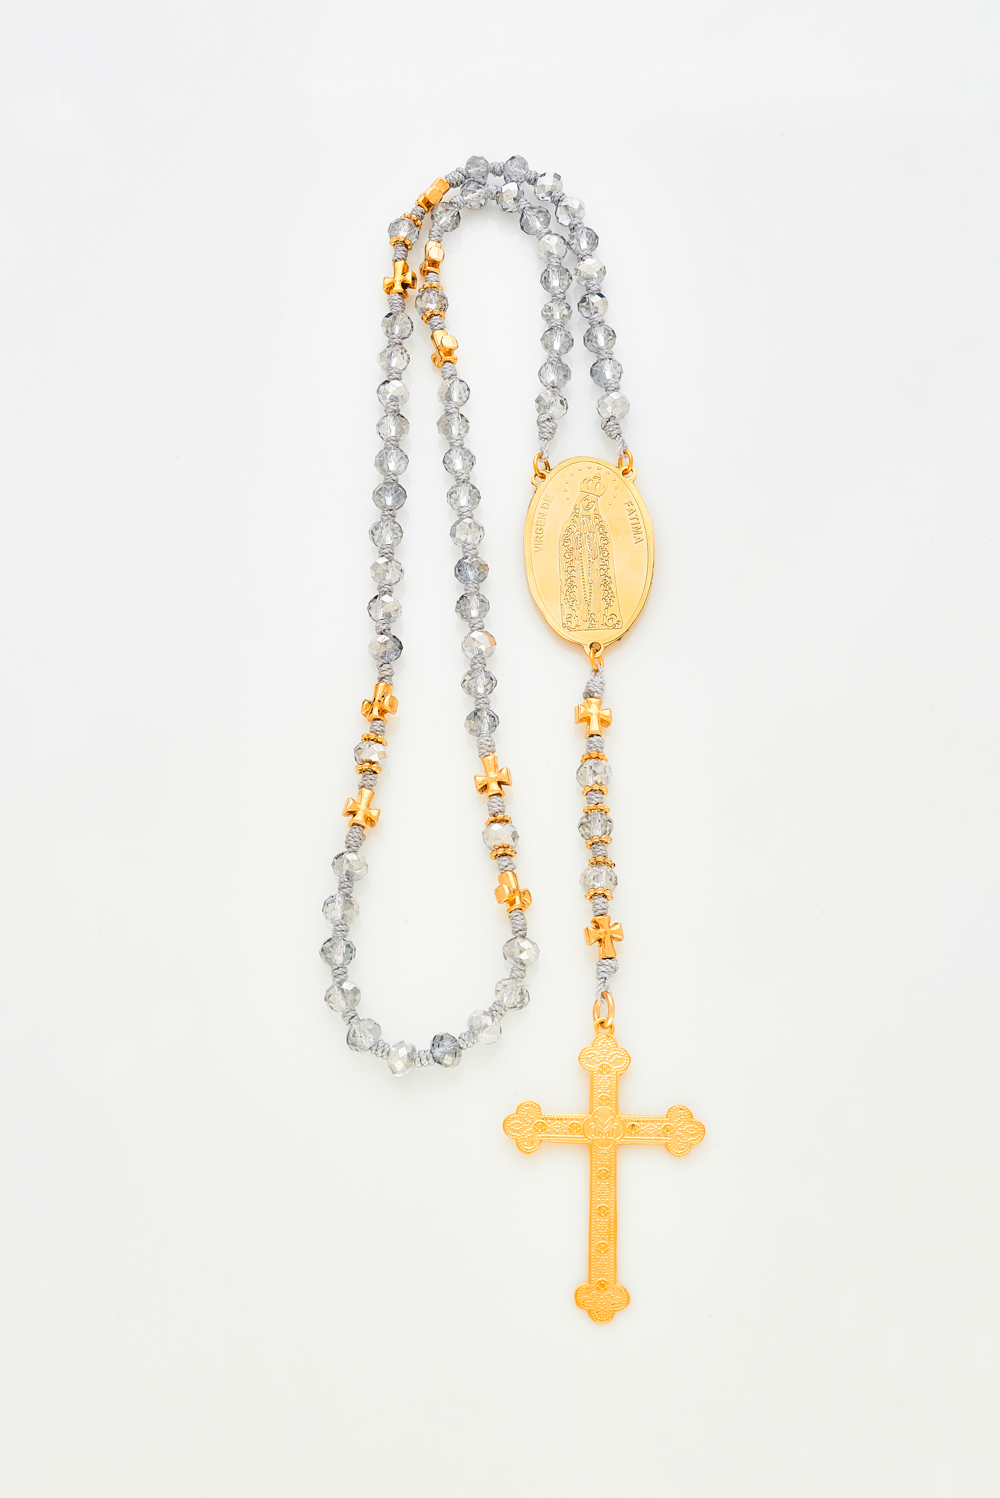 Women's collection rosary